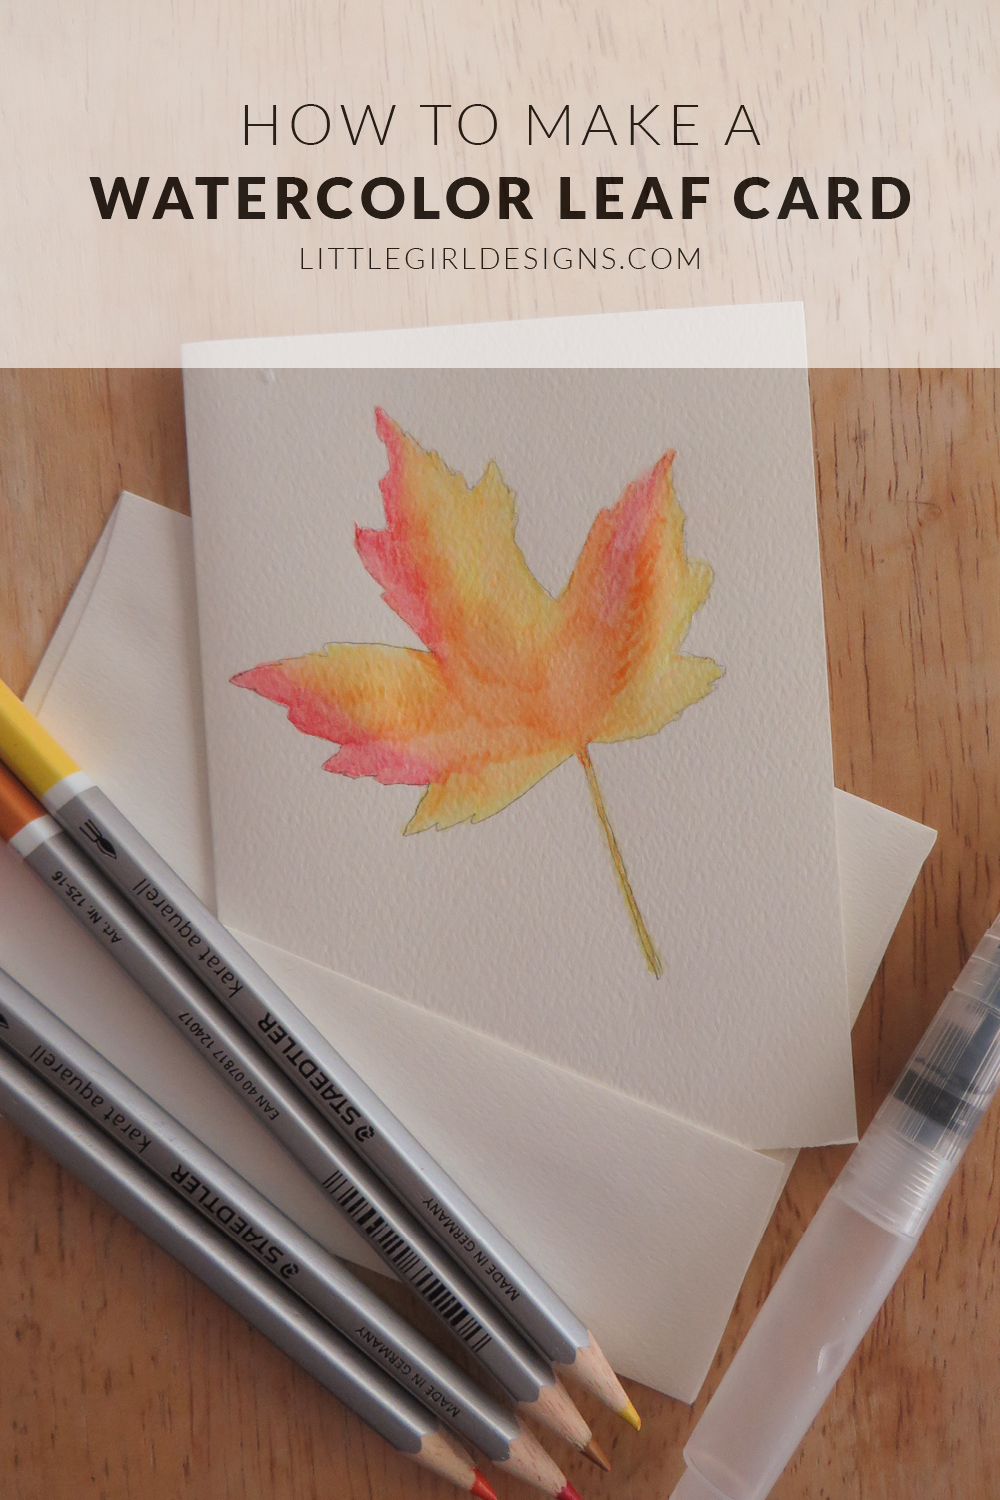 How to Make a Watercolor Leaf Card